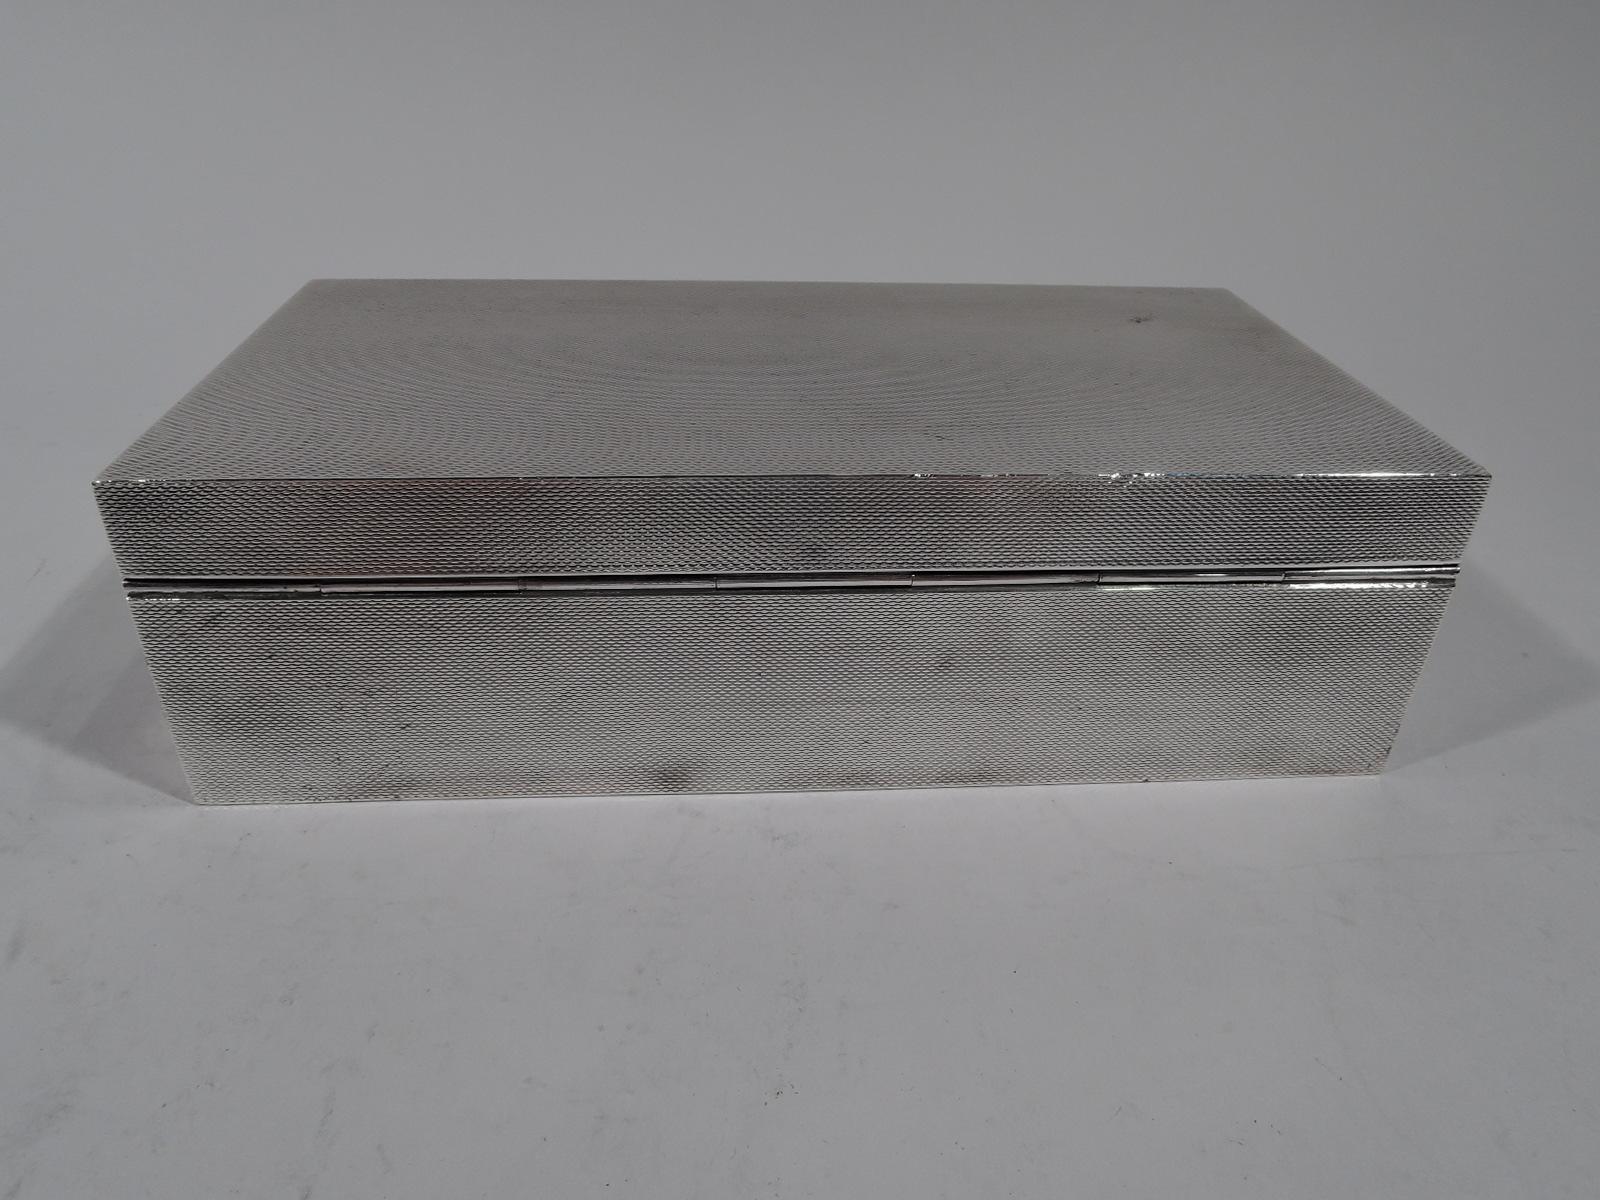 Art Deco sterling silver box. Made by CJ Vander in London in 1963. Rectangular with straight sides. Cover hinged, tabbed, and flat. Allover engine-turned wavy lines. Box and cover interior cedar lined and partitioned. Box underside leather lined.